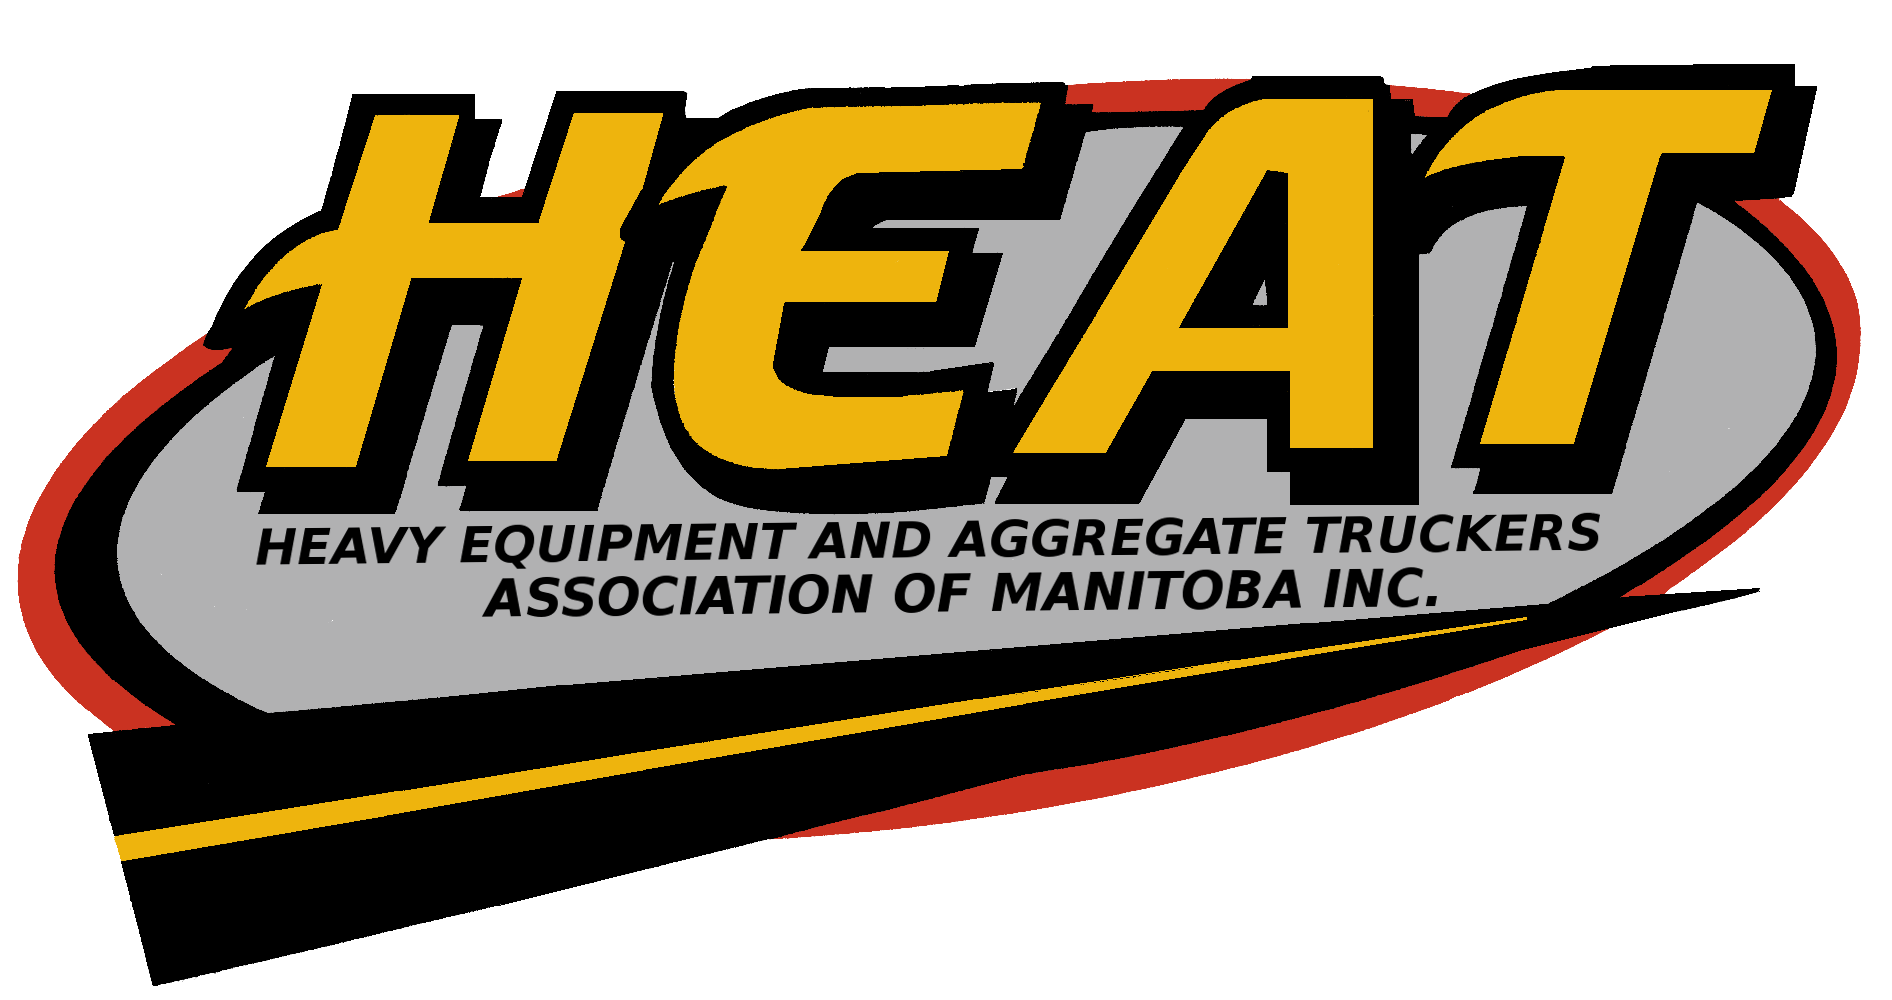 Heavy Equipment & Aggregate Truckers Association of Manitoba Inc